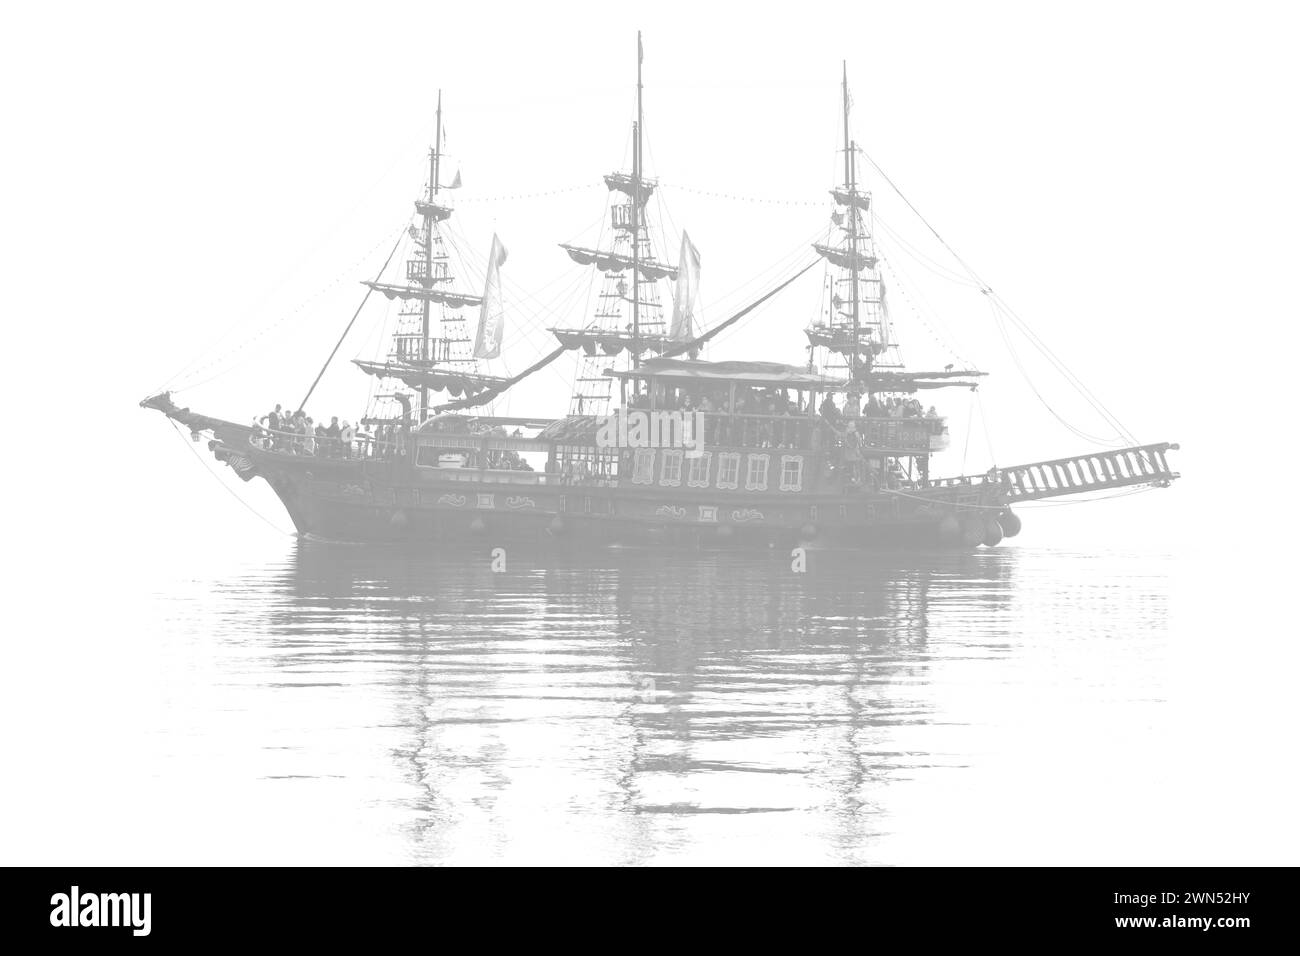 Ghostly voyage. Pirate ship tourist attraction cruising in the misty aegean sea. Stock Photo